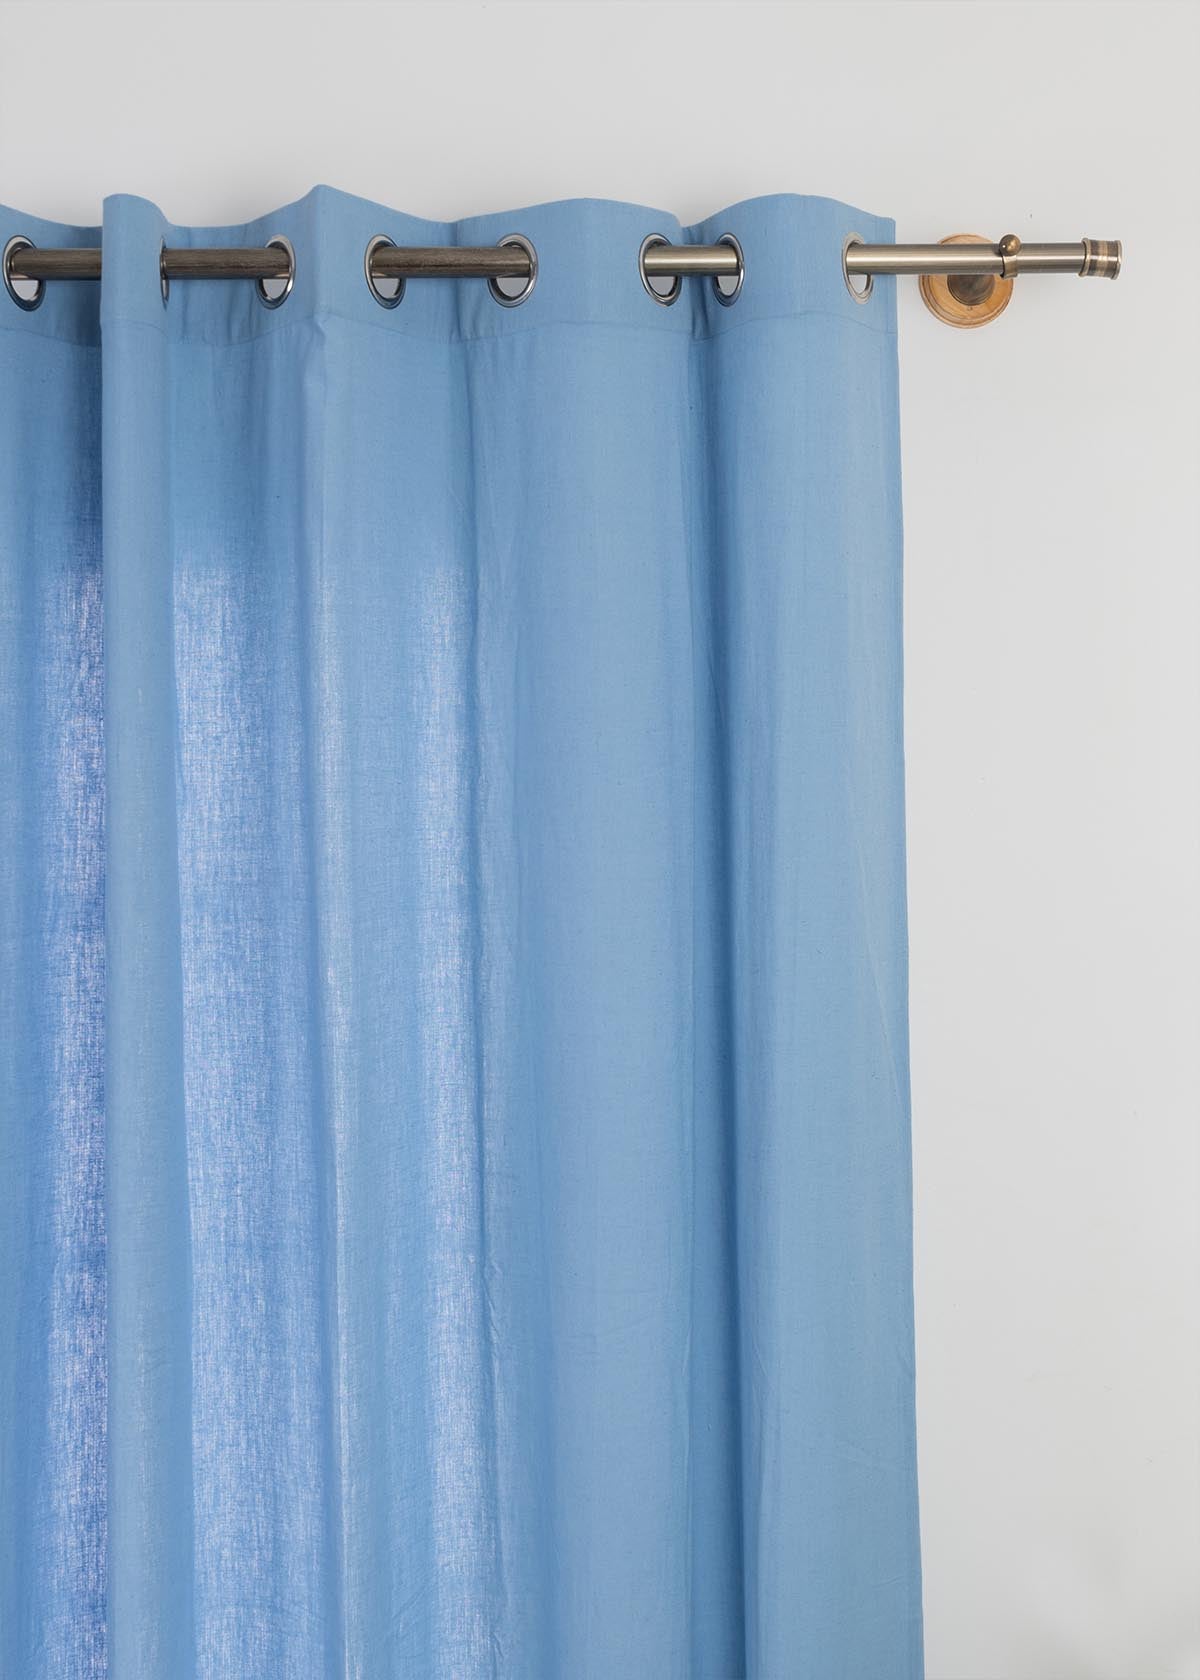 Solid Powder blue 100% customizable cotton plain curtain for bedroom - Room darkening - Pack of 1